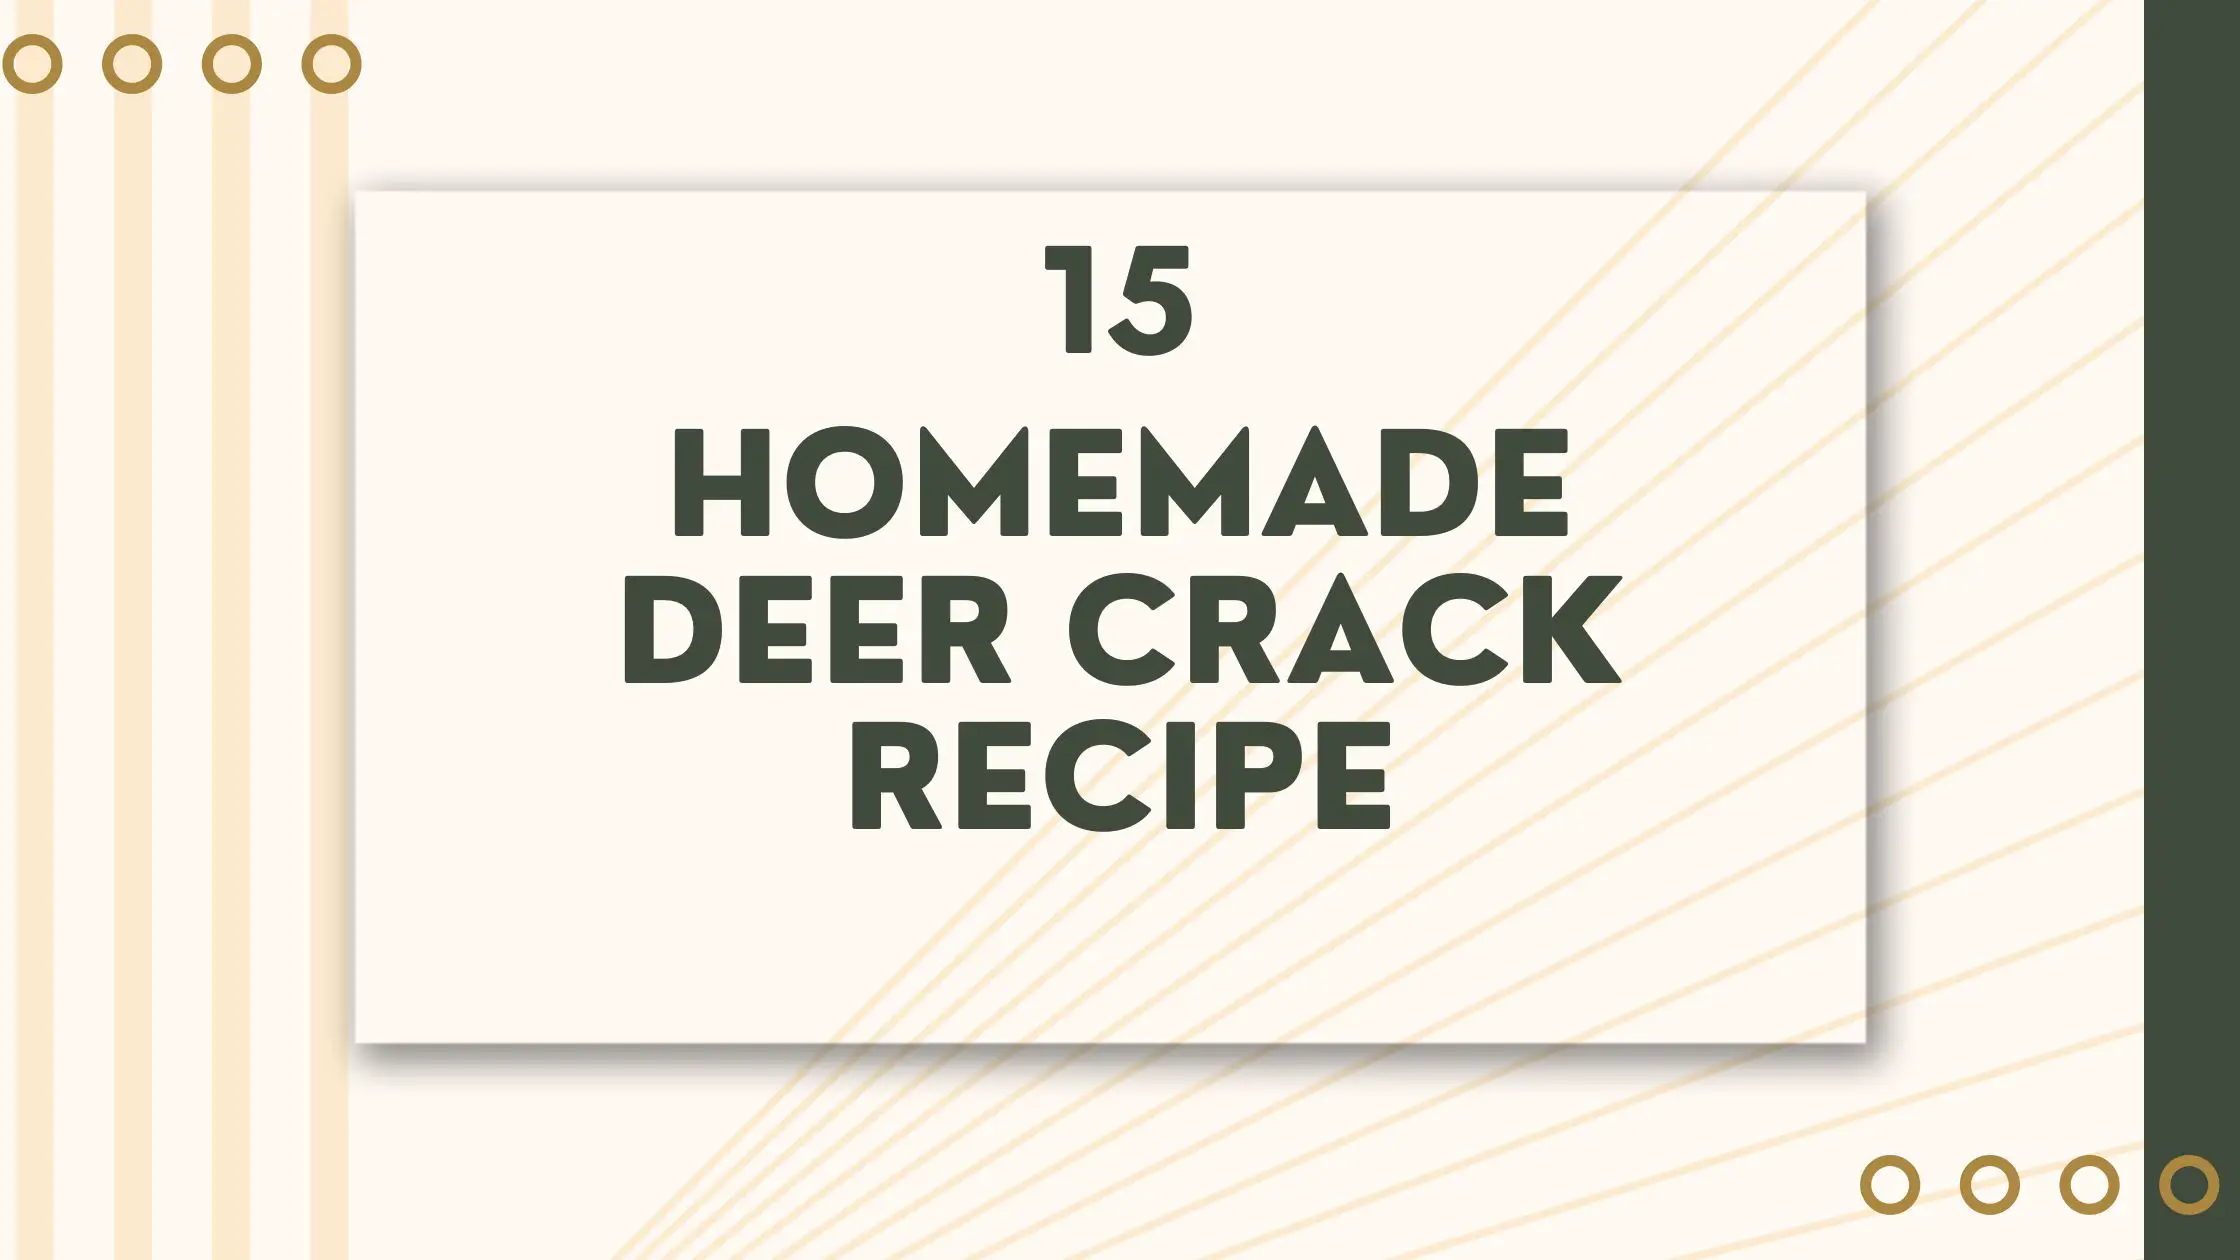 15 New Homemade Deer Crack Recipe Cheap, Easy and Quick